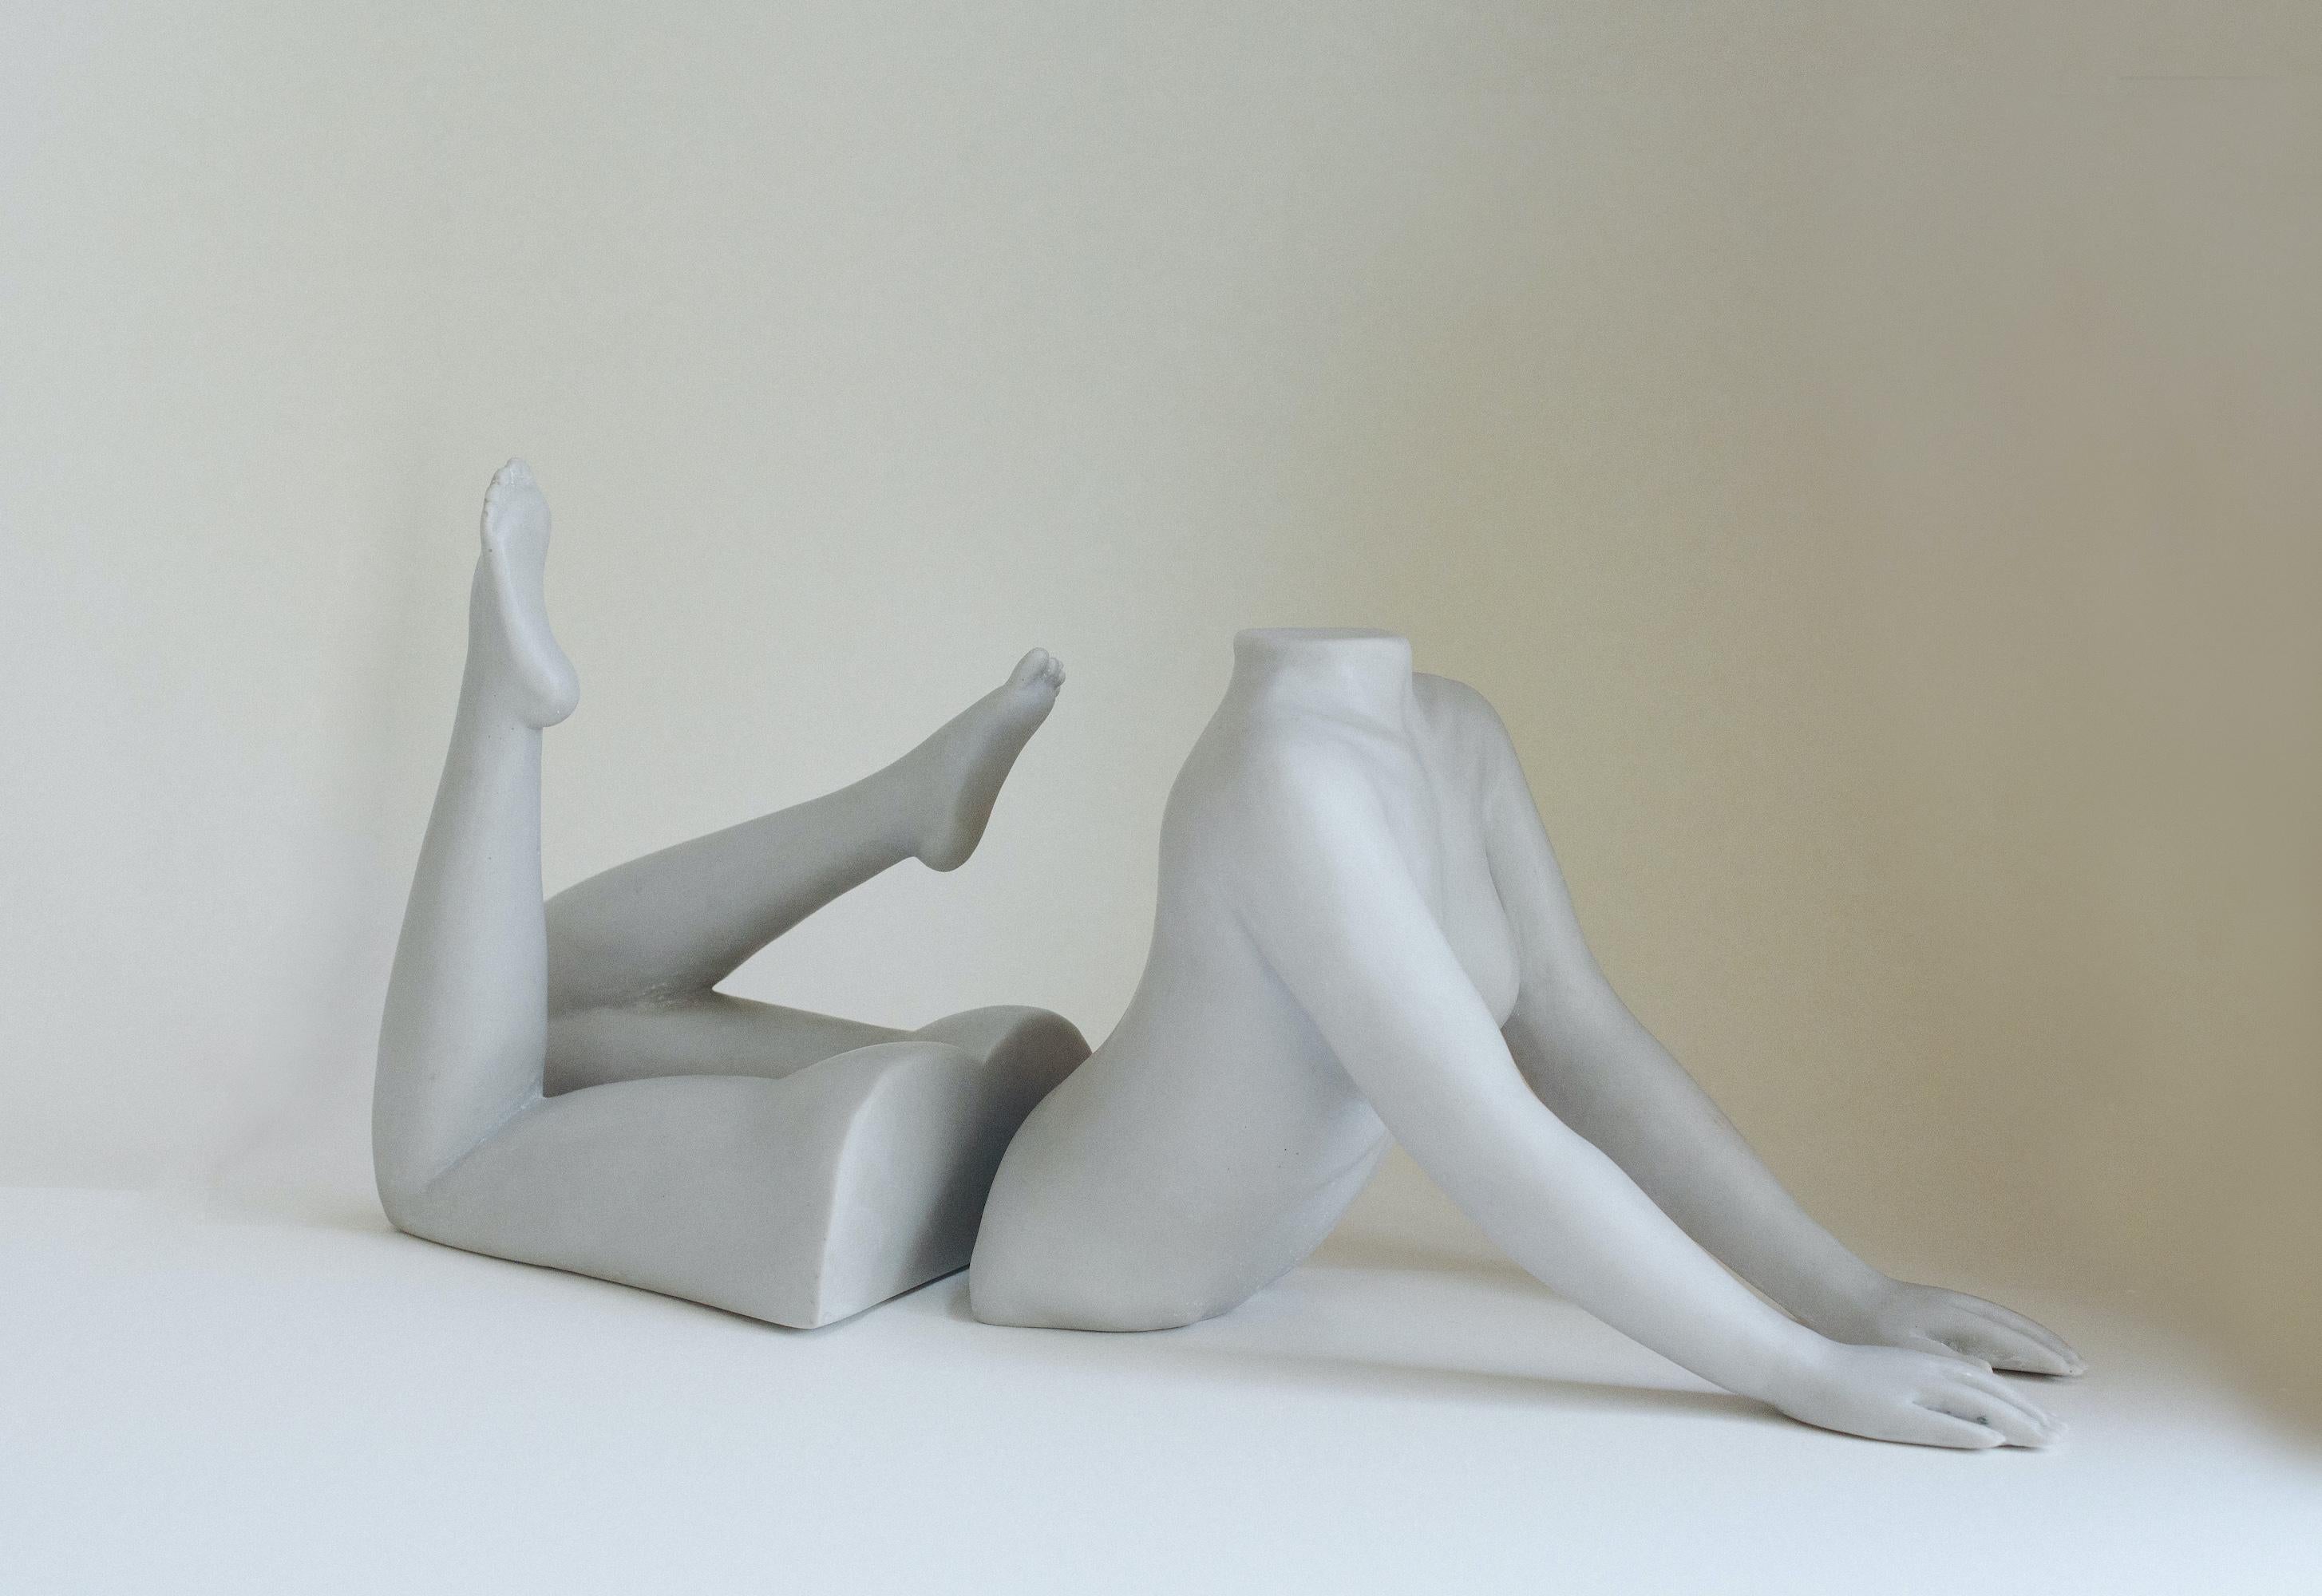 IL Corpo II bookends by Marcela Cure
Dimensions: upper W 31 x D 16 x H 24 cm / lower W 21 x D 18 x H 24 cm.
Materials: resin and stone composite.

Our Il Corpo sculpture is a set of two individual sculptures portraying the upper and lower body